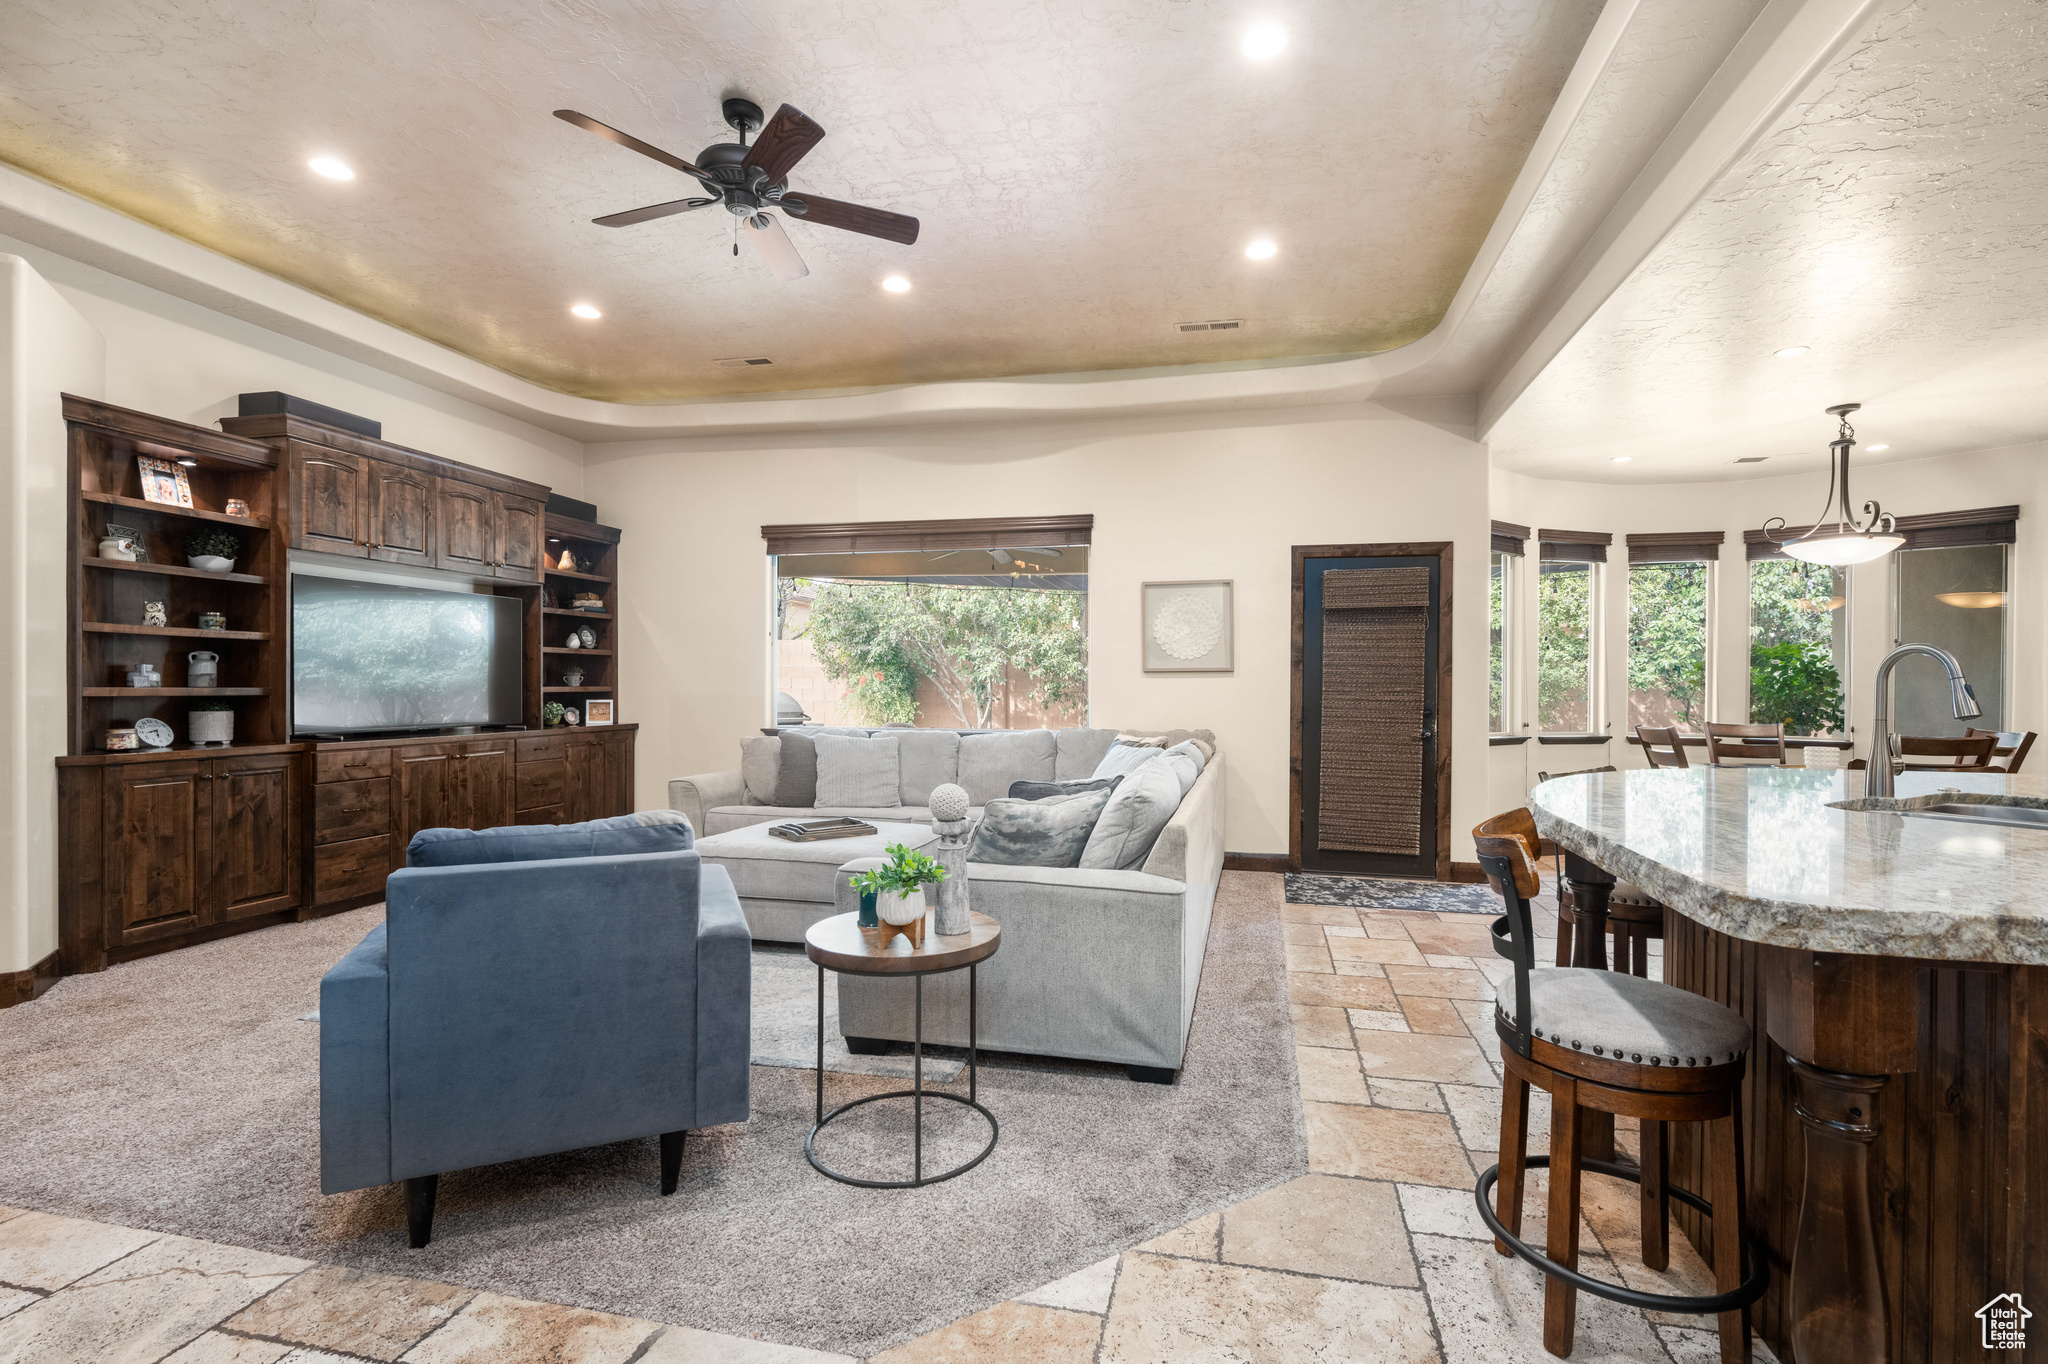 Carpeted living room with sink, ceiling fan, and a tray ceiling